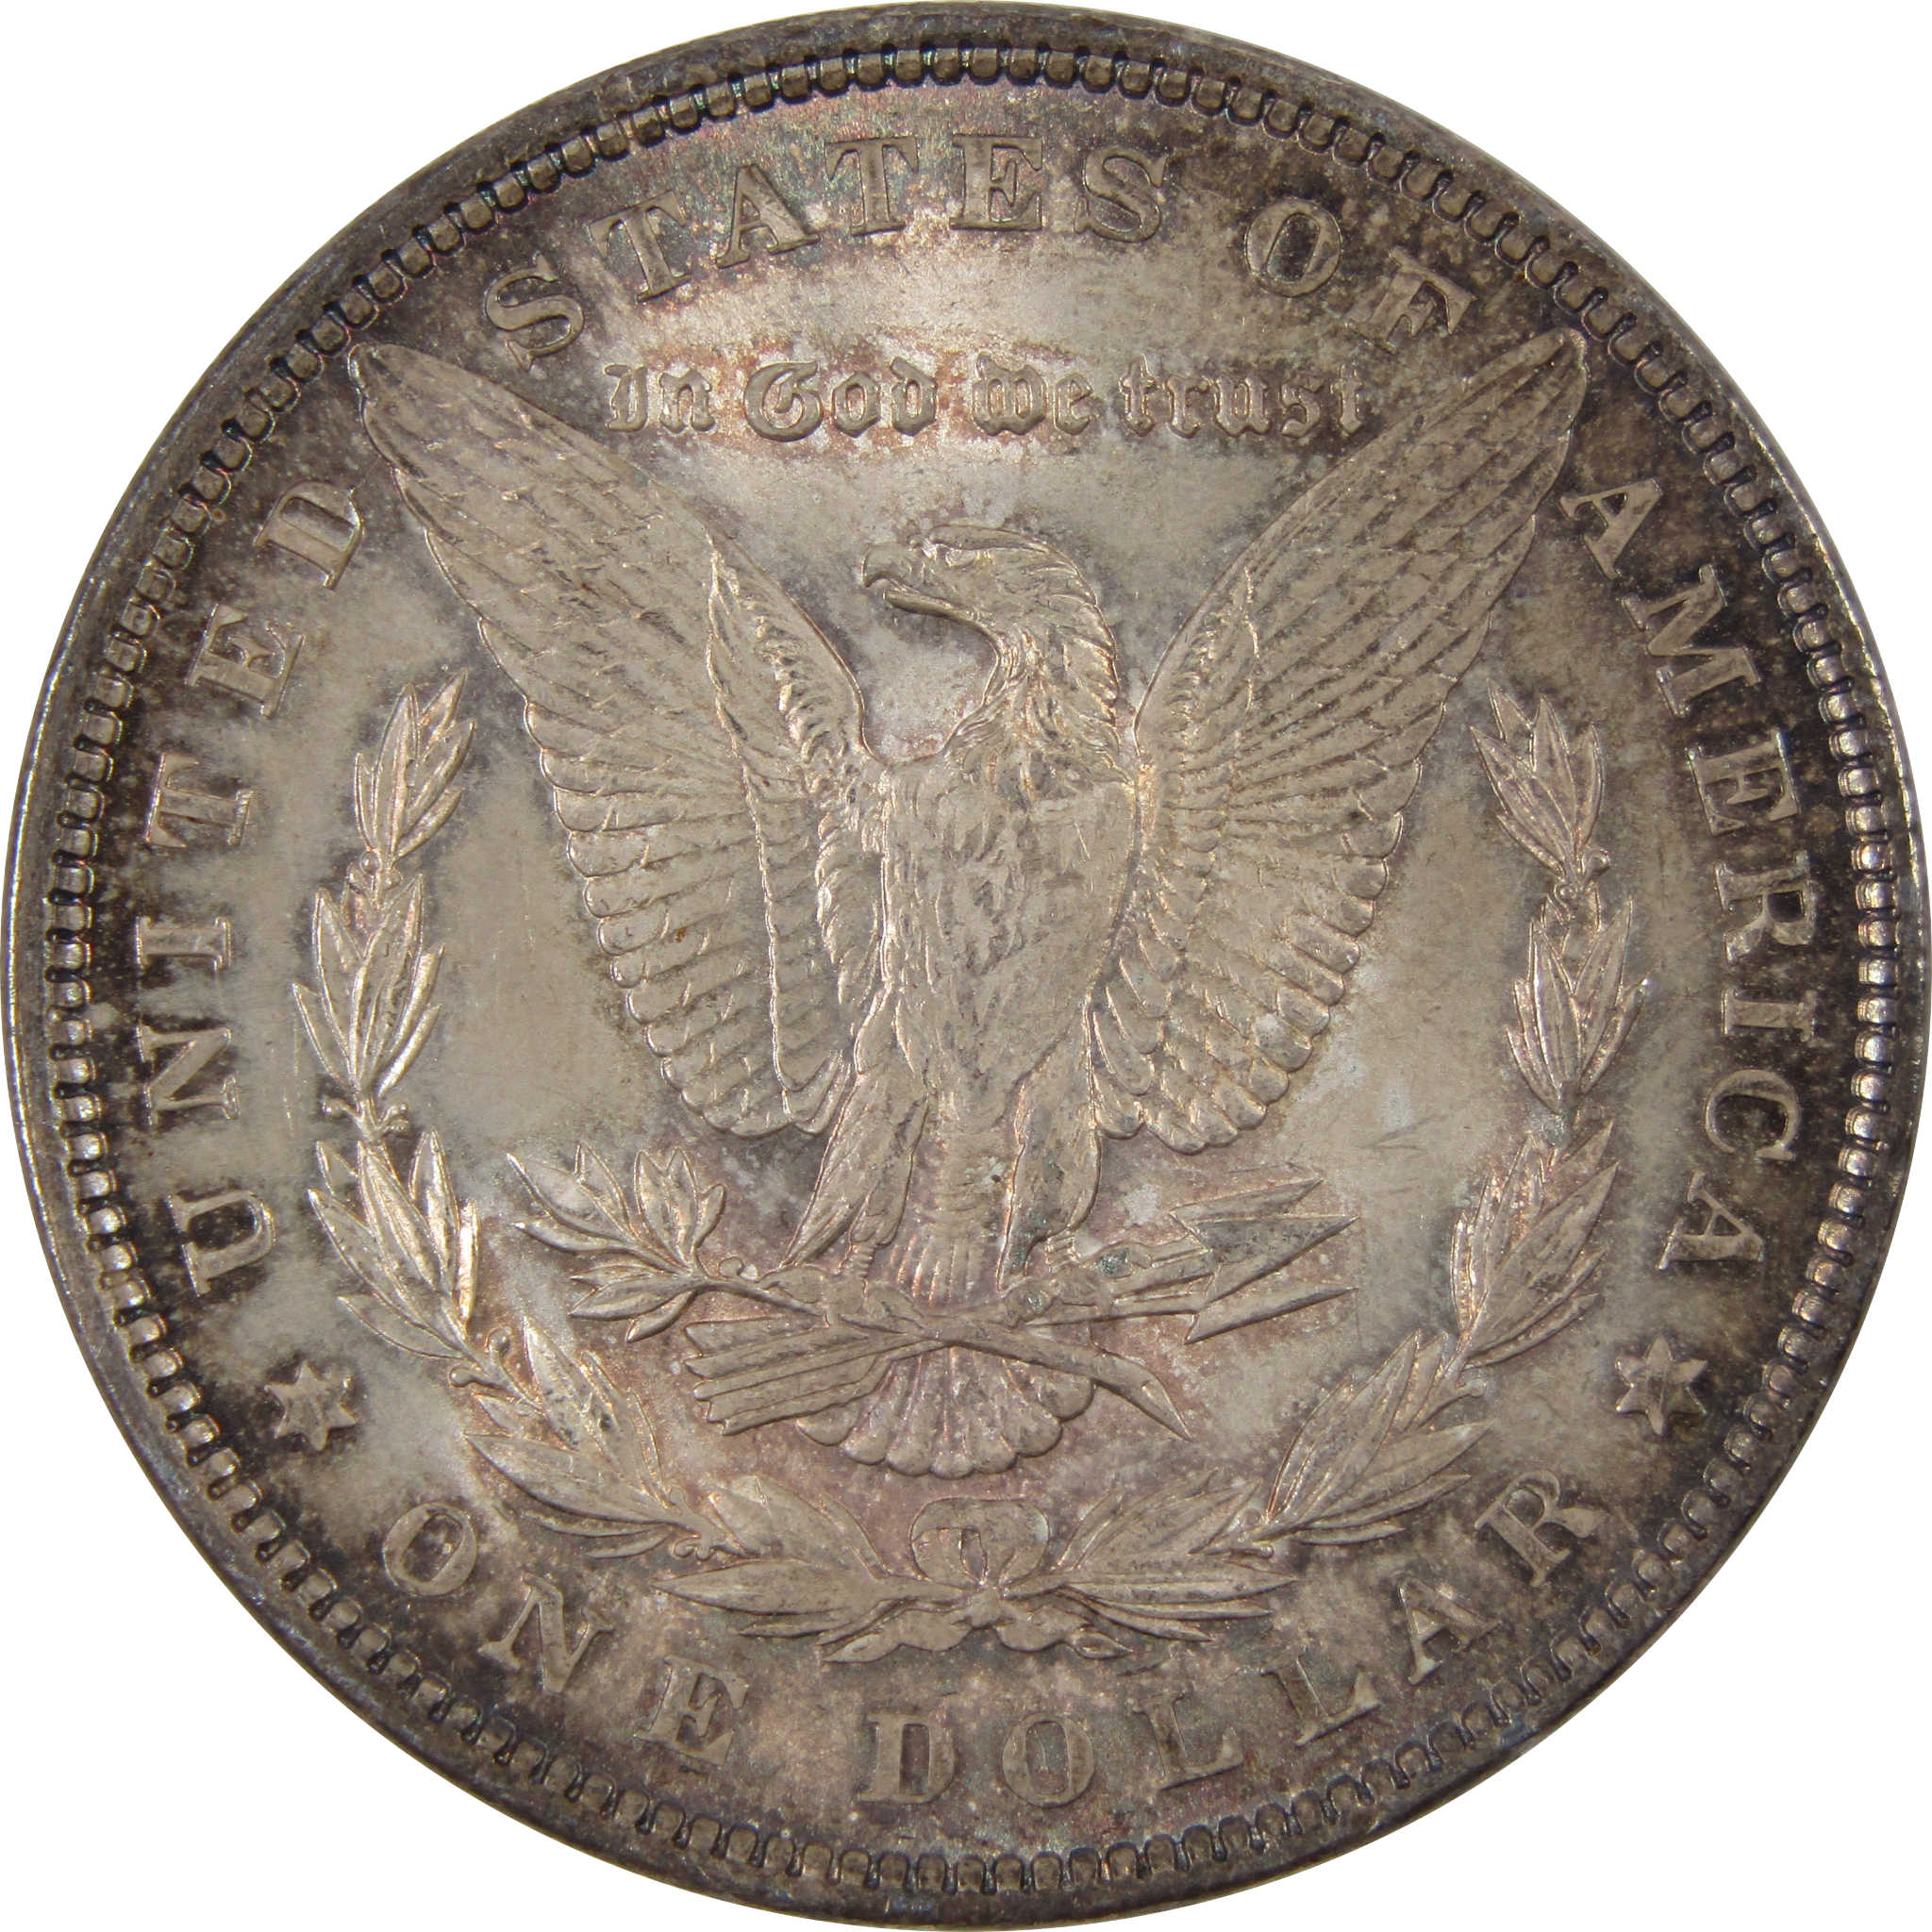 1897 Morgan Dollar AU About Uncirculated 90% Silver Coin SKU:I2797 - Morgan coin - Morgan silver dollar - Morgan silver dollar for sale - Profile Coins &amp; Collectibles